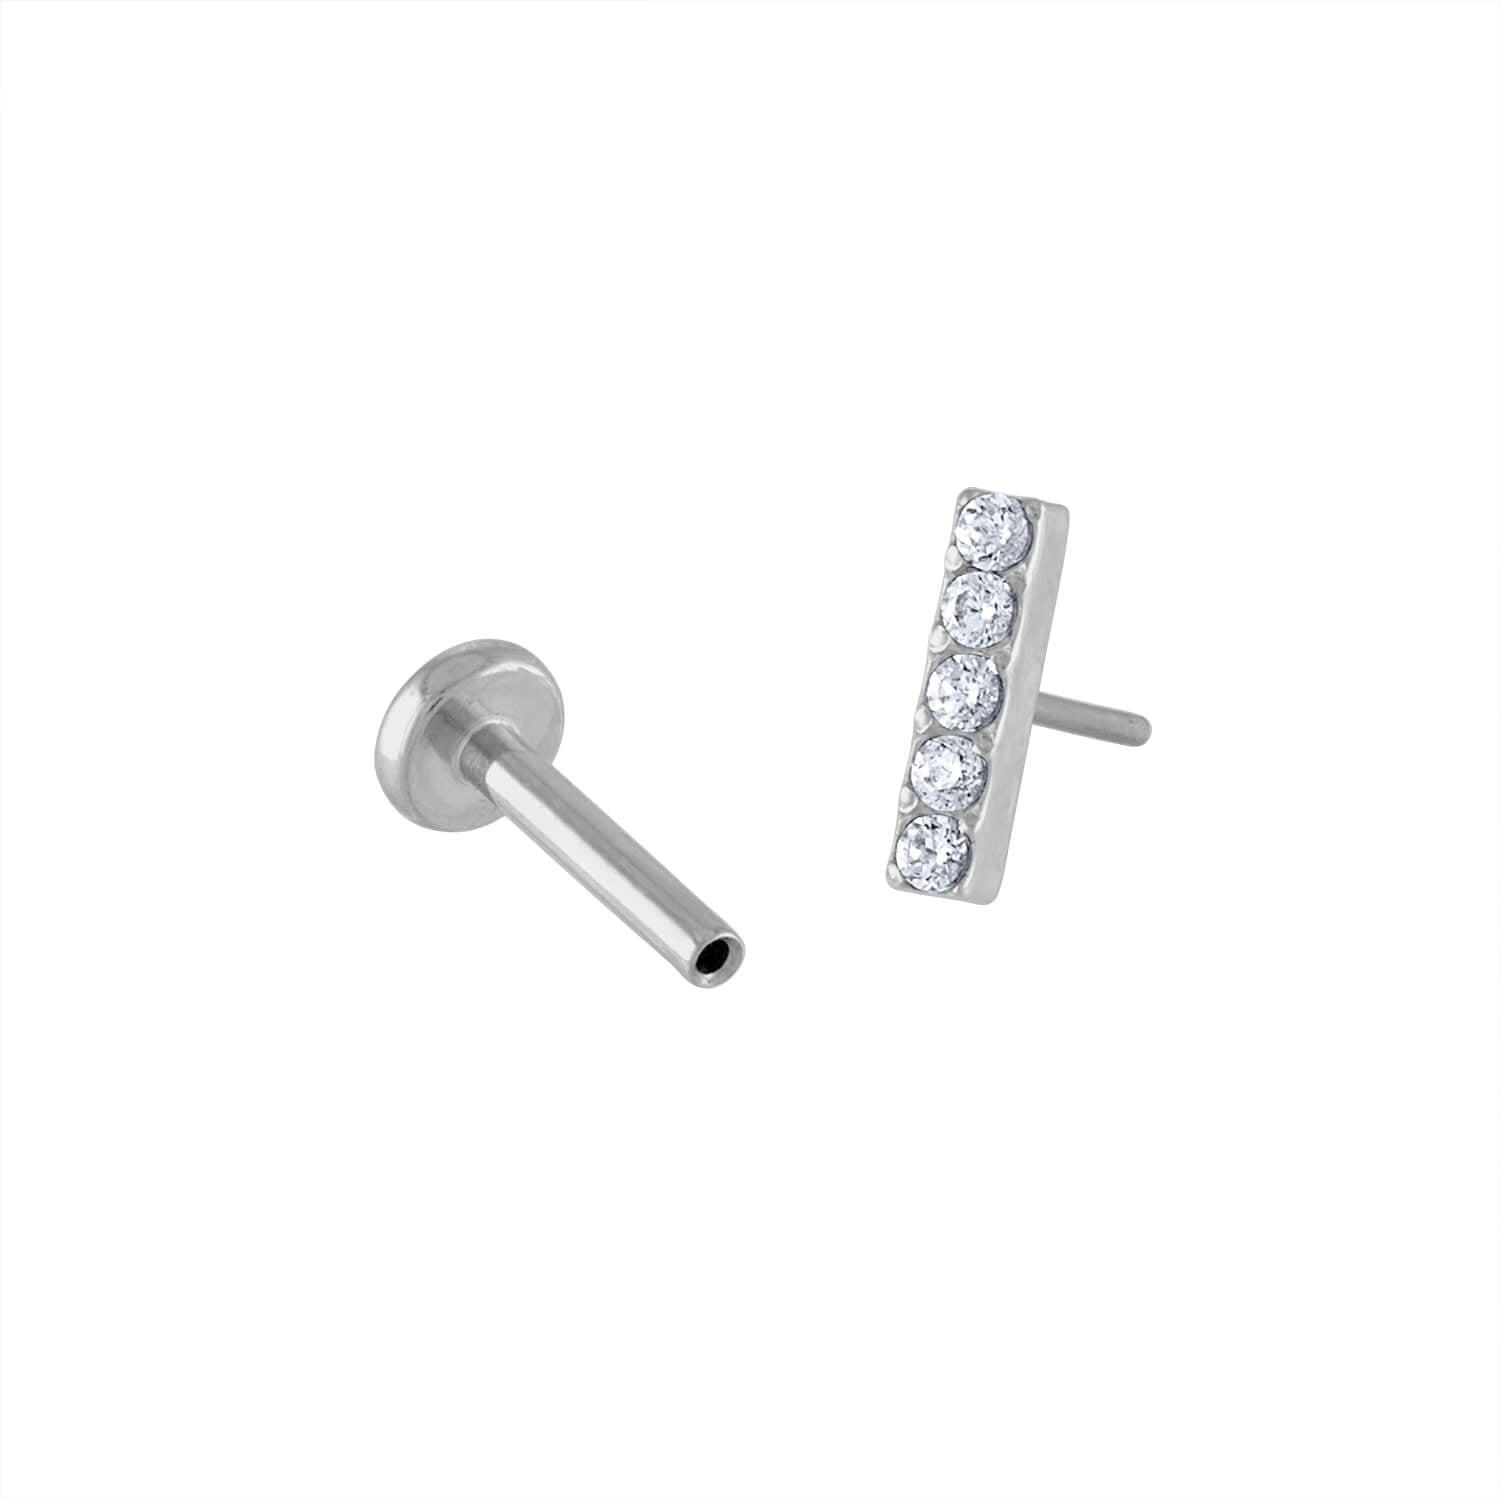 Pave Bar Push Pin Flat Back Earring in Silver